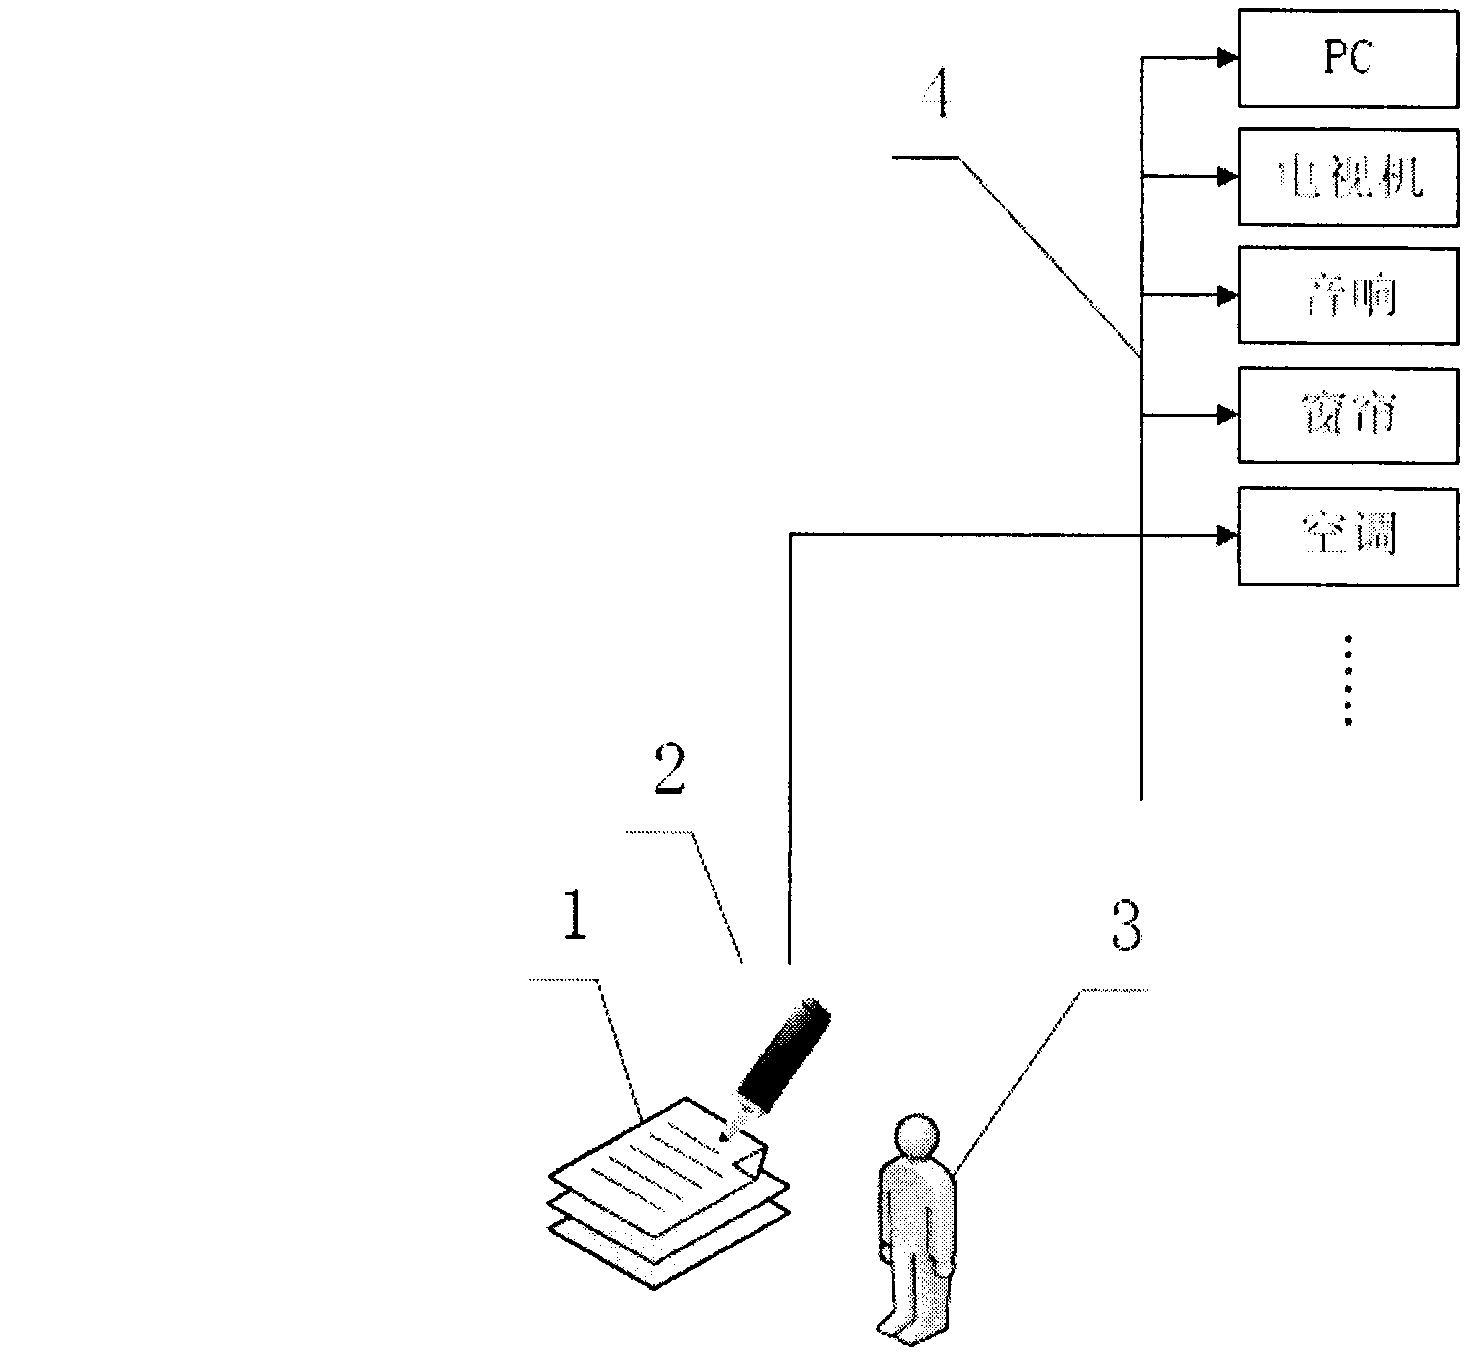 Paper menu control system using point coding